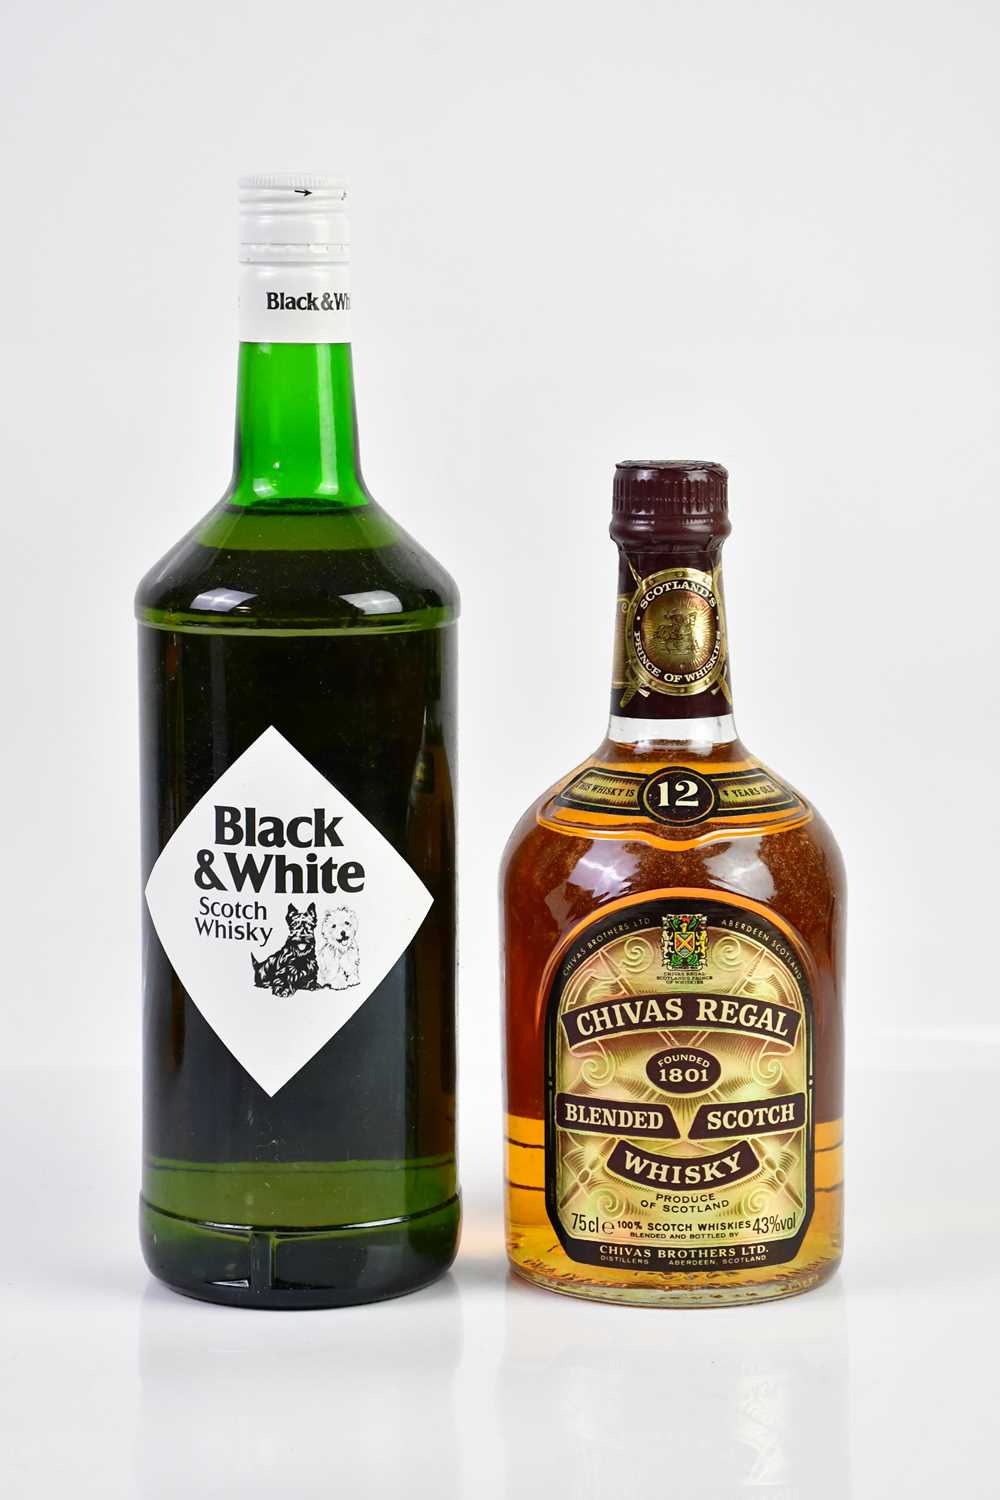 MIXED SPIRITS; a bottle of Chivas Regal 12 years old, Black & White Scotch whisky, Yates's Finest - Image 2 of 6